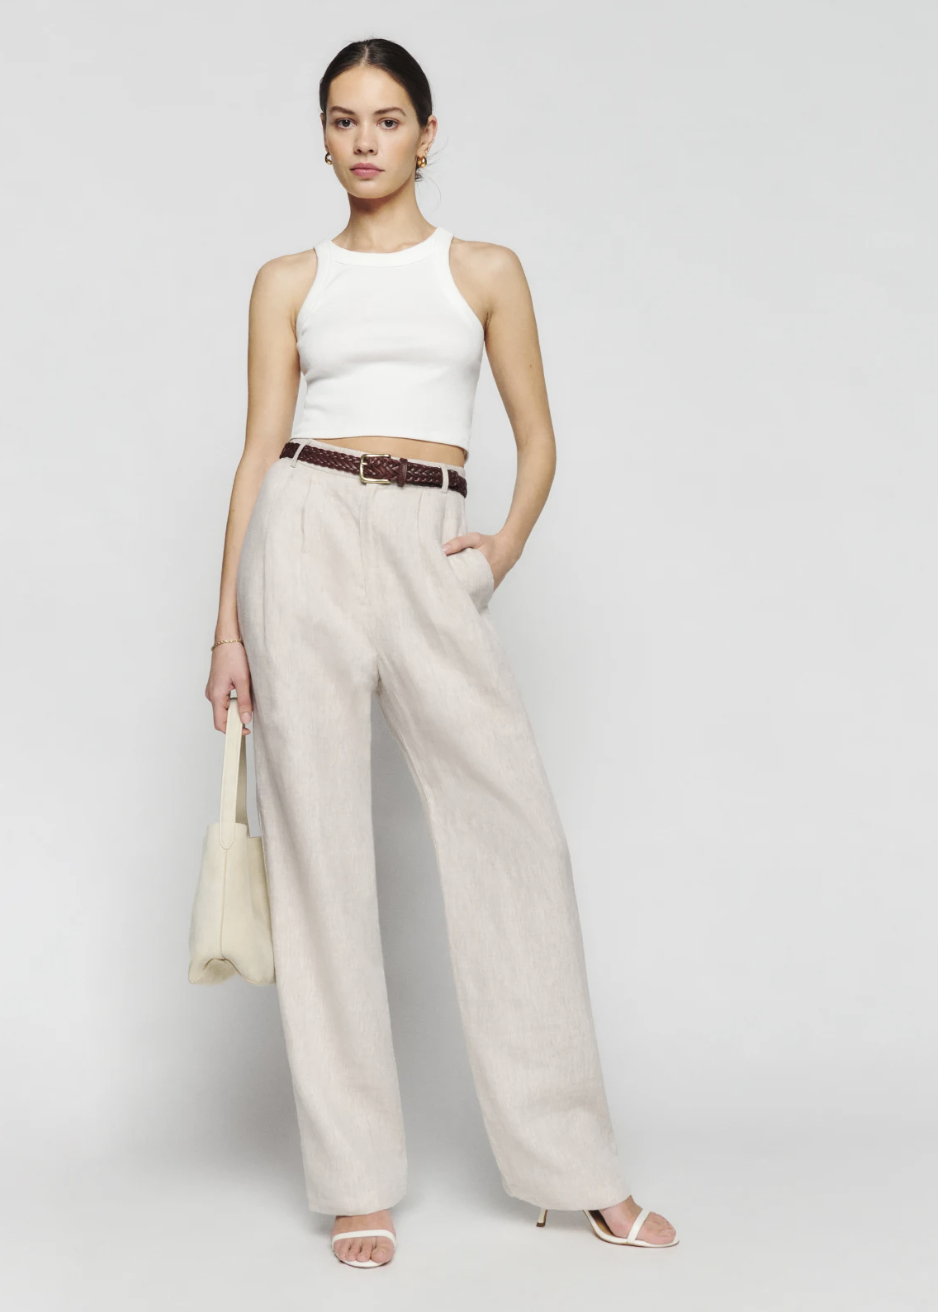 A model in a white tank and cream wide leg linen trousers.